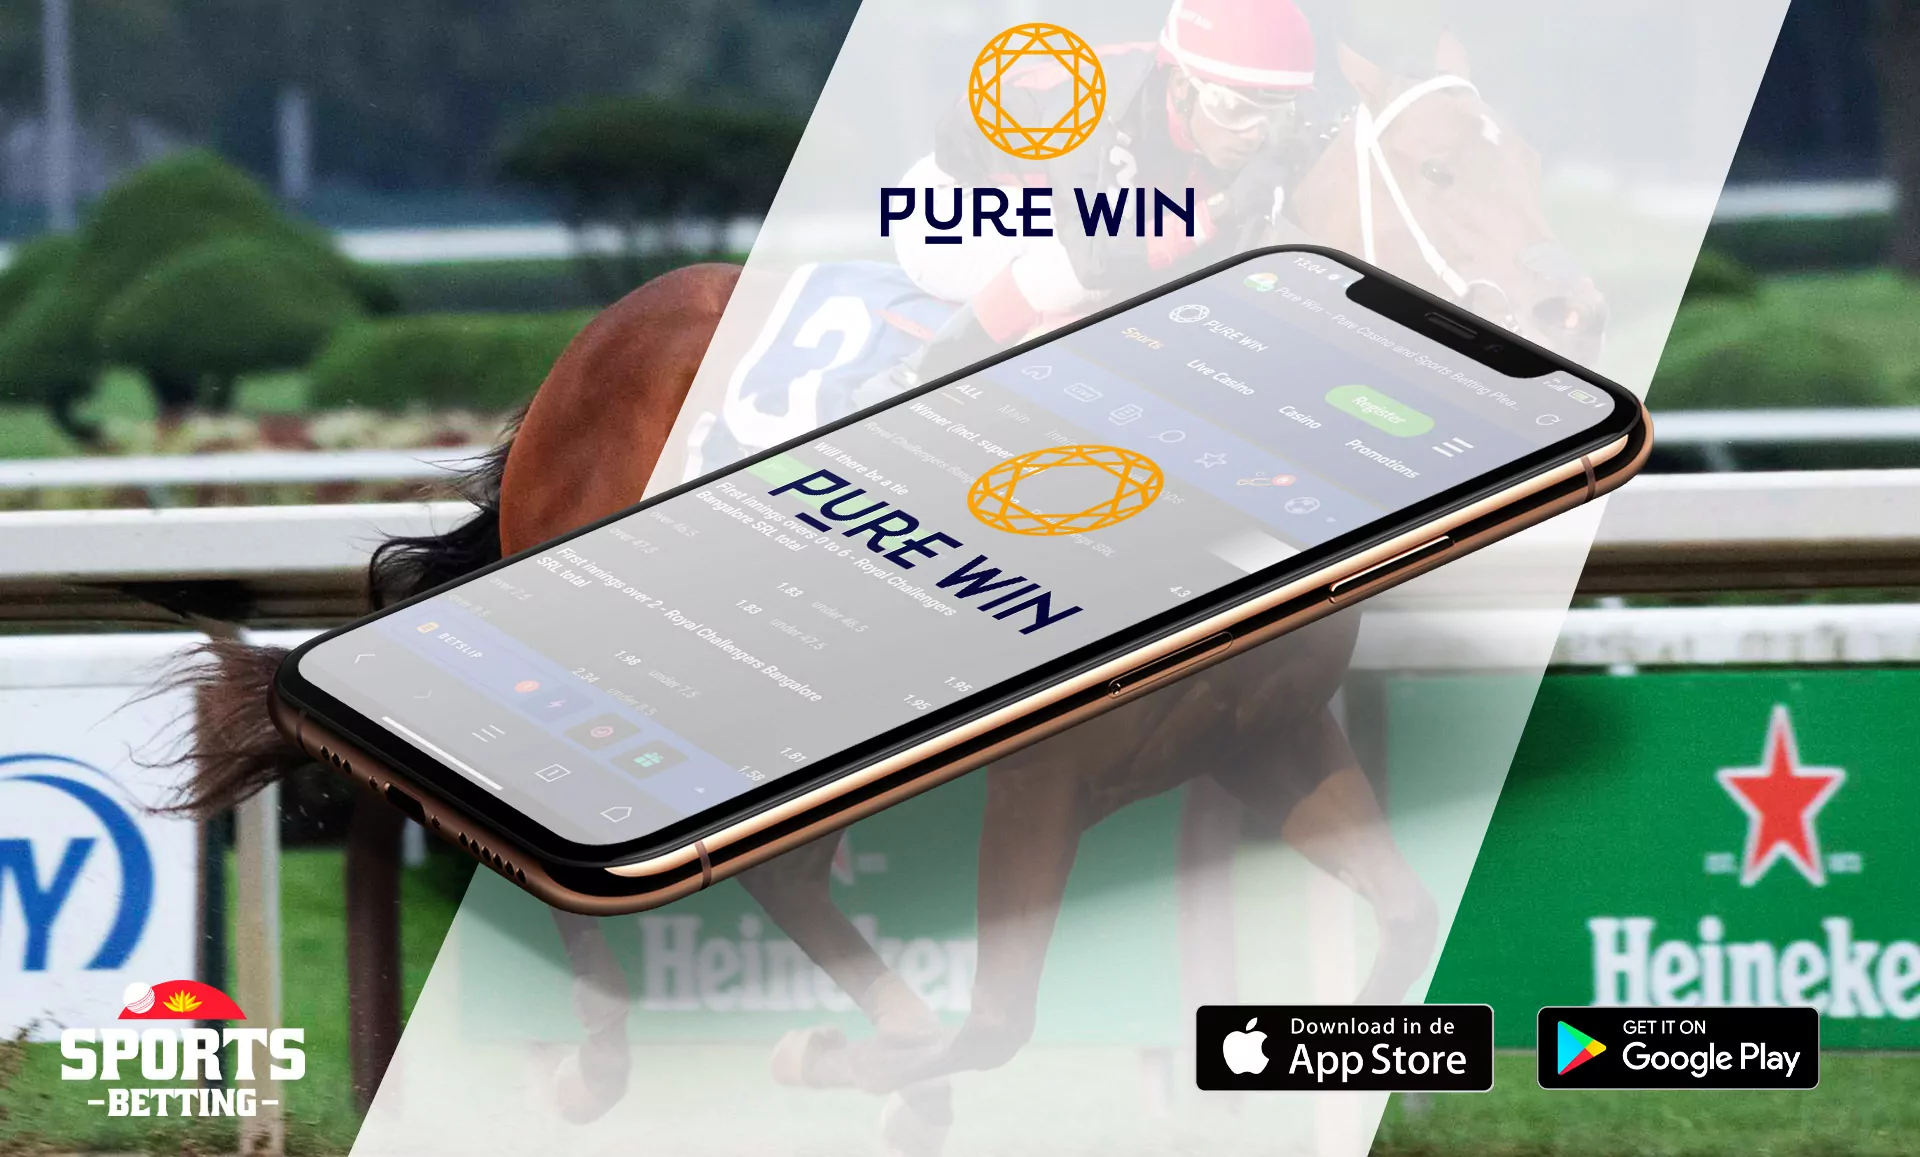 Bet on horse racing in Bangladesh with Pure Win betting company.